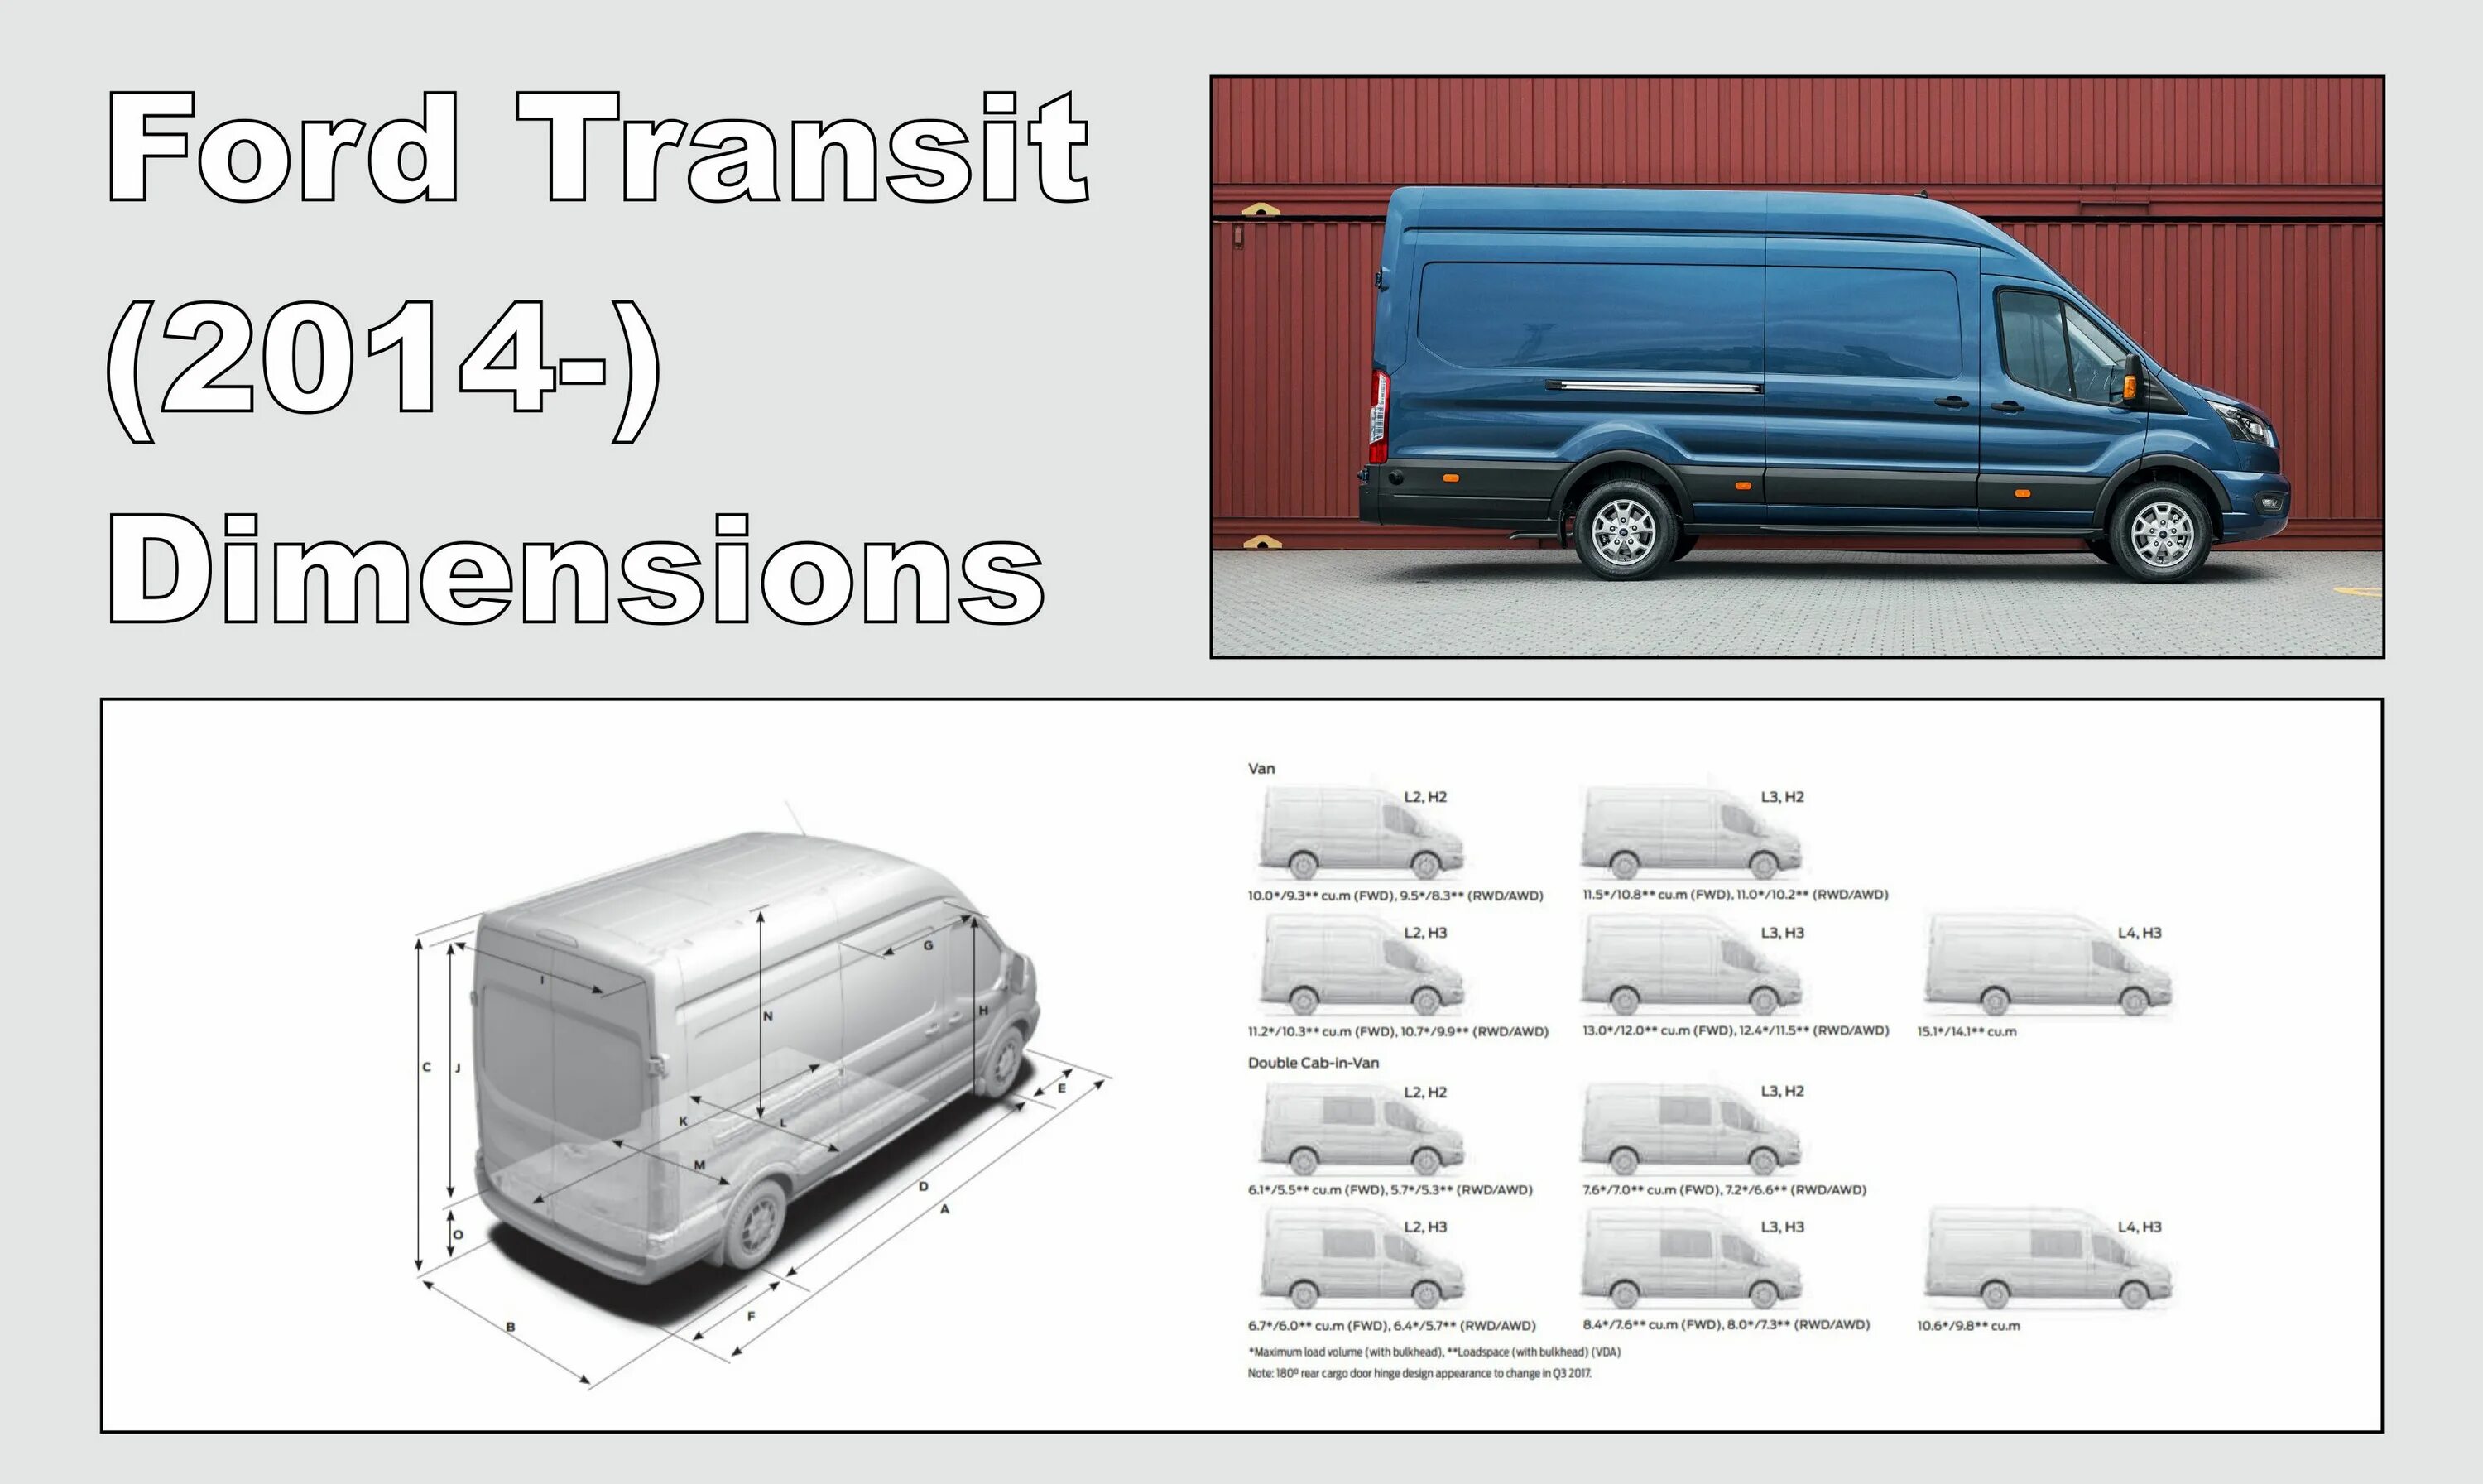 Ford Transit 350 Dimensions. Ford Transit l3h3 габариты. Форд Транзит l2 Размеры кузова. Ford Transit Dimensions.